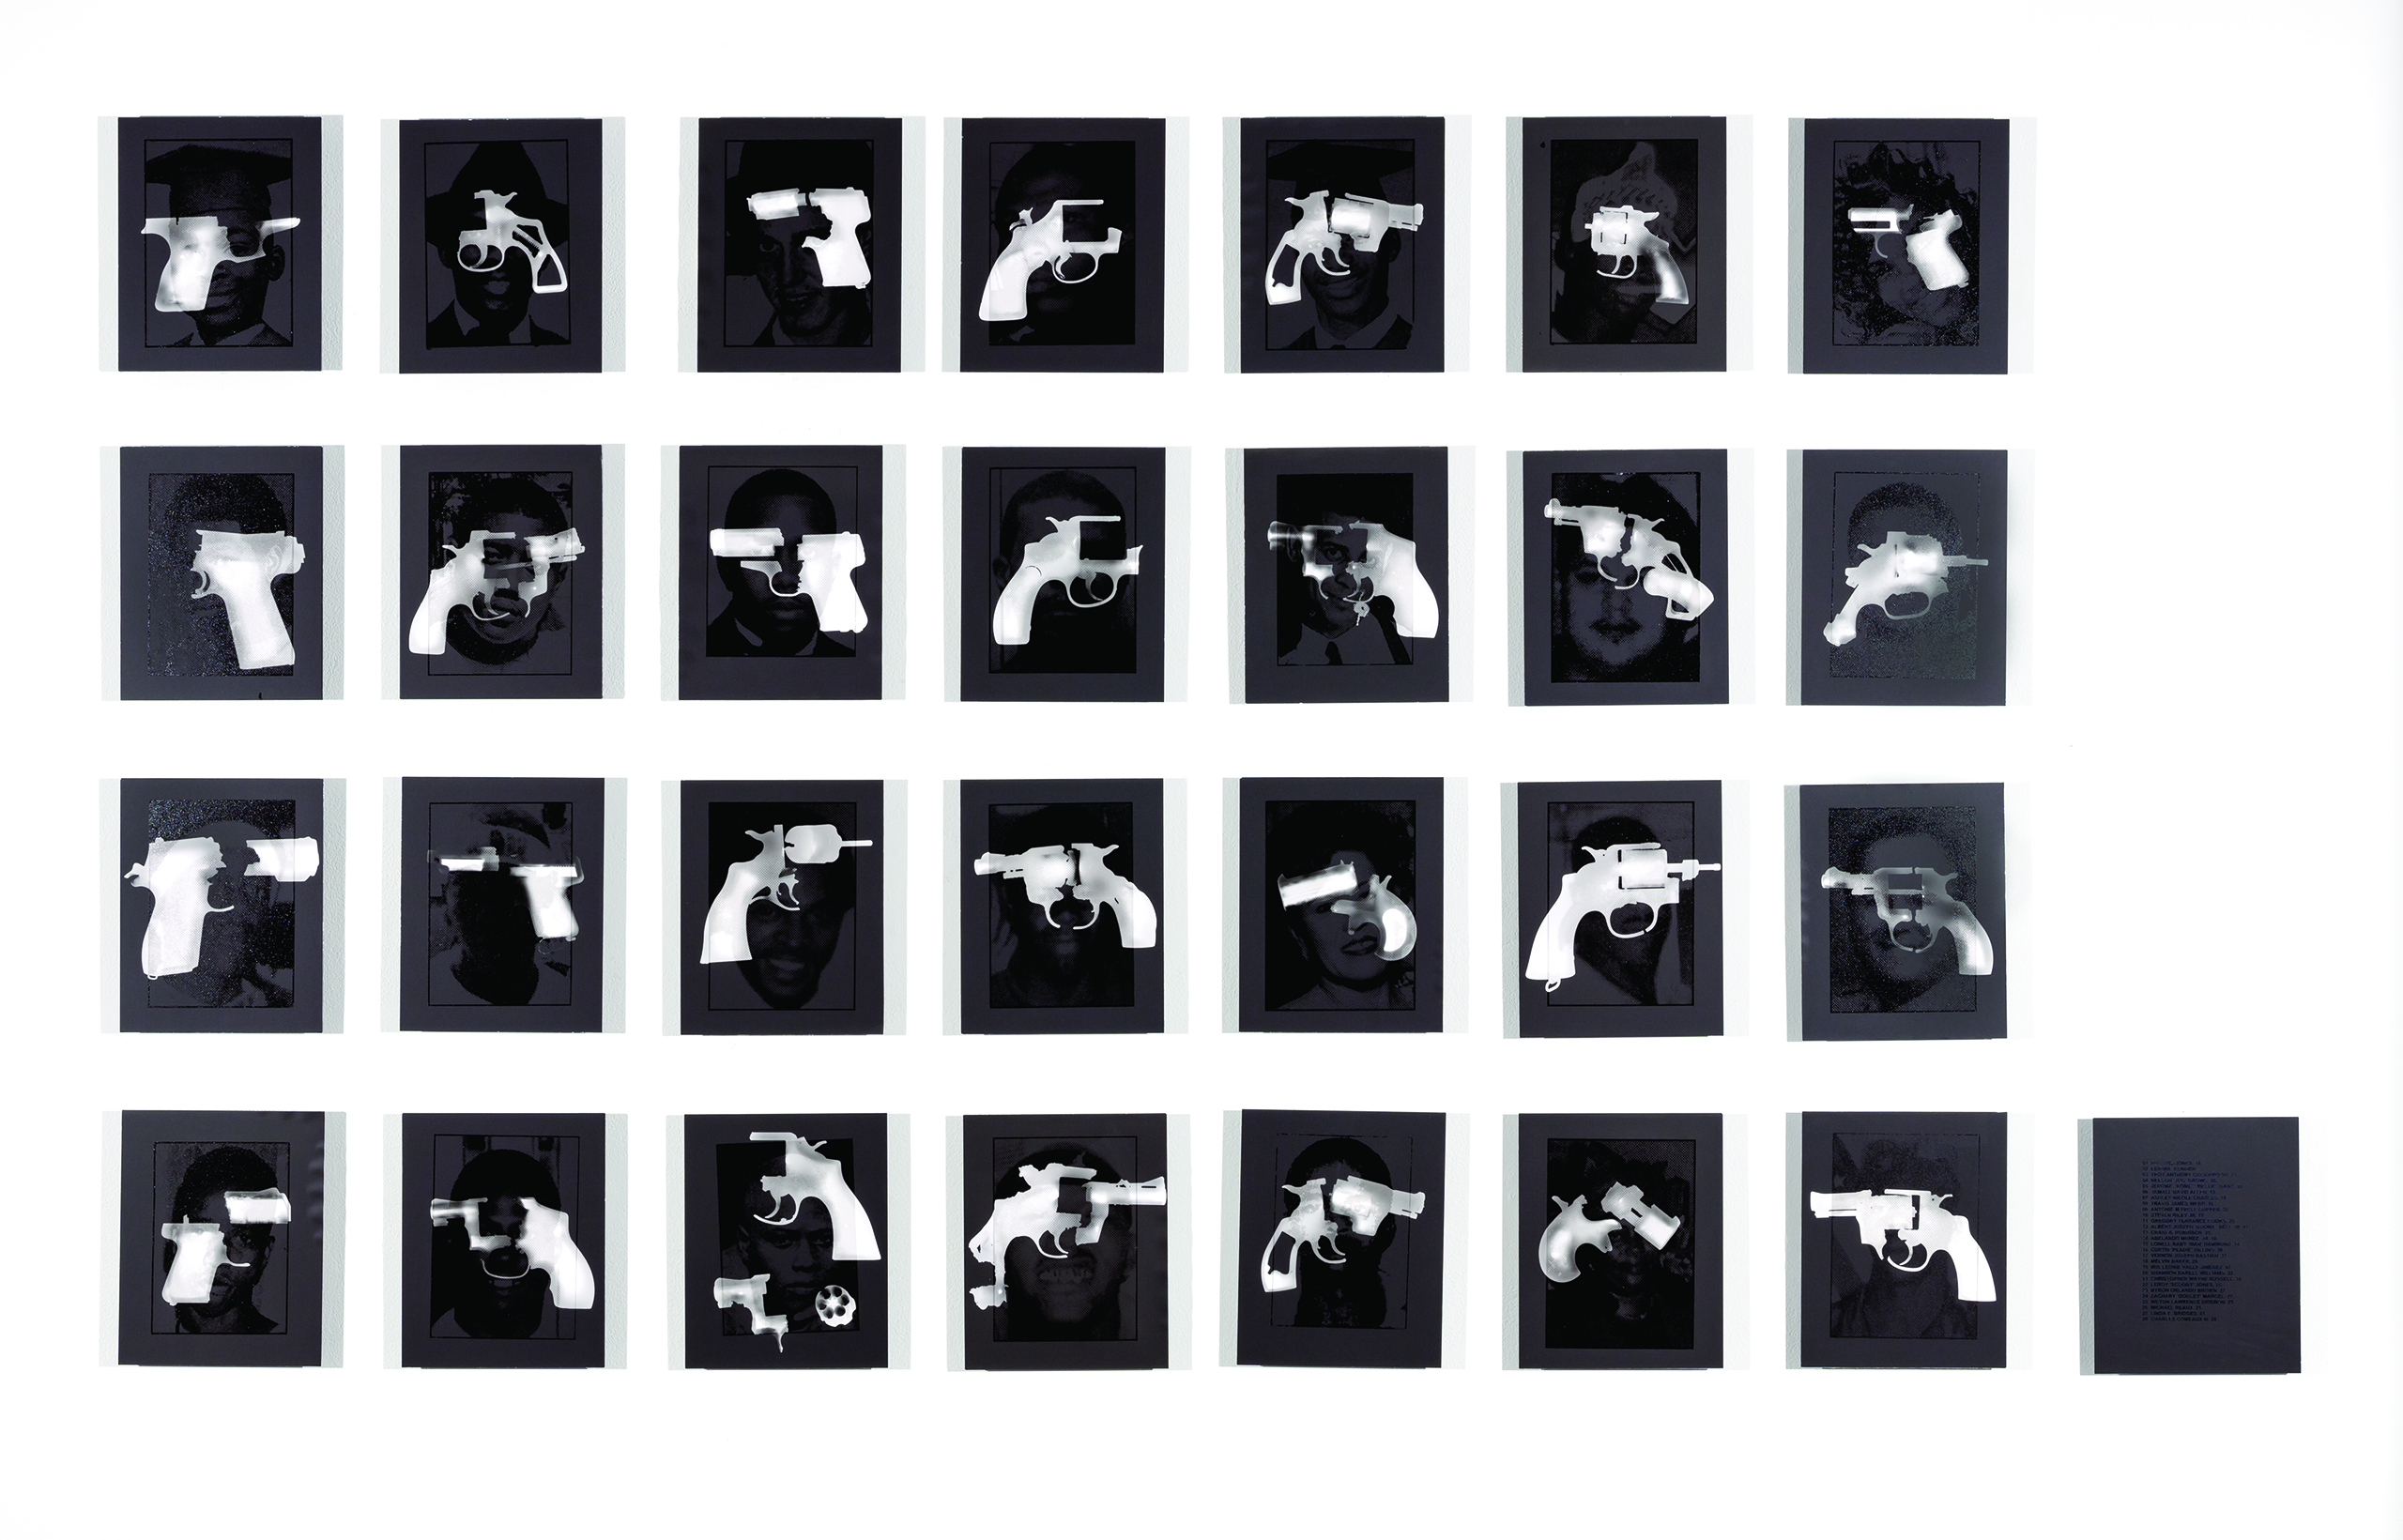 The genesis of 'One Hot Month' was initially an attempt to chronicle our environment by clipping the obituaries of 'death by gunshot' victims during August 2002, when there was nearly one homicide per day. ... These images represent the need for an examination of the roots of this terminal societal dysfunction.  —Generic Art Solutions